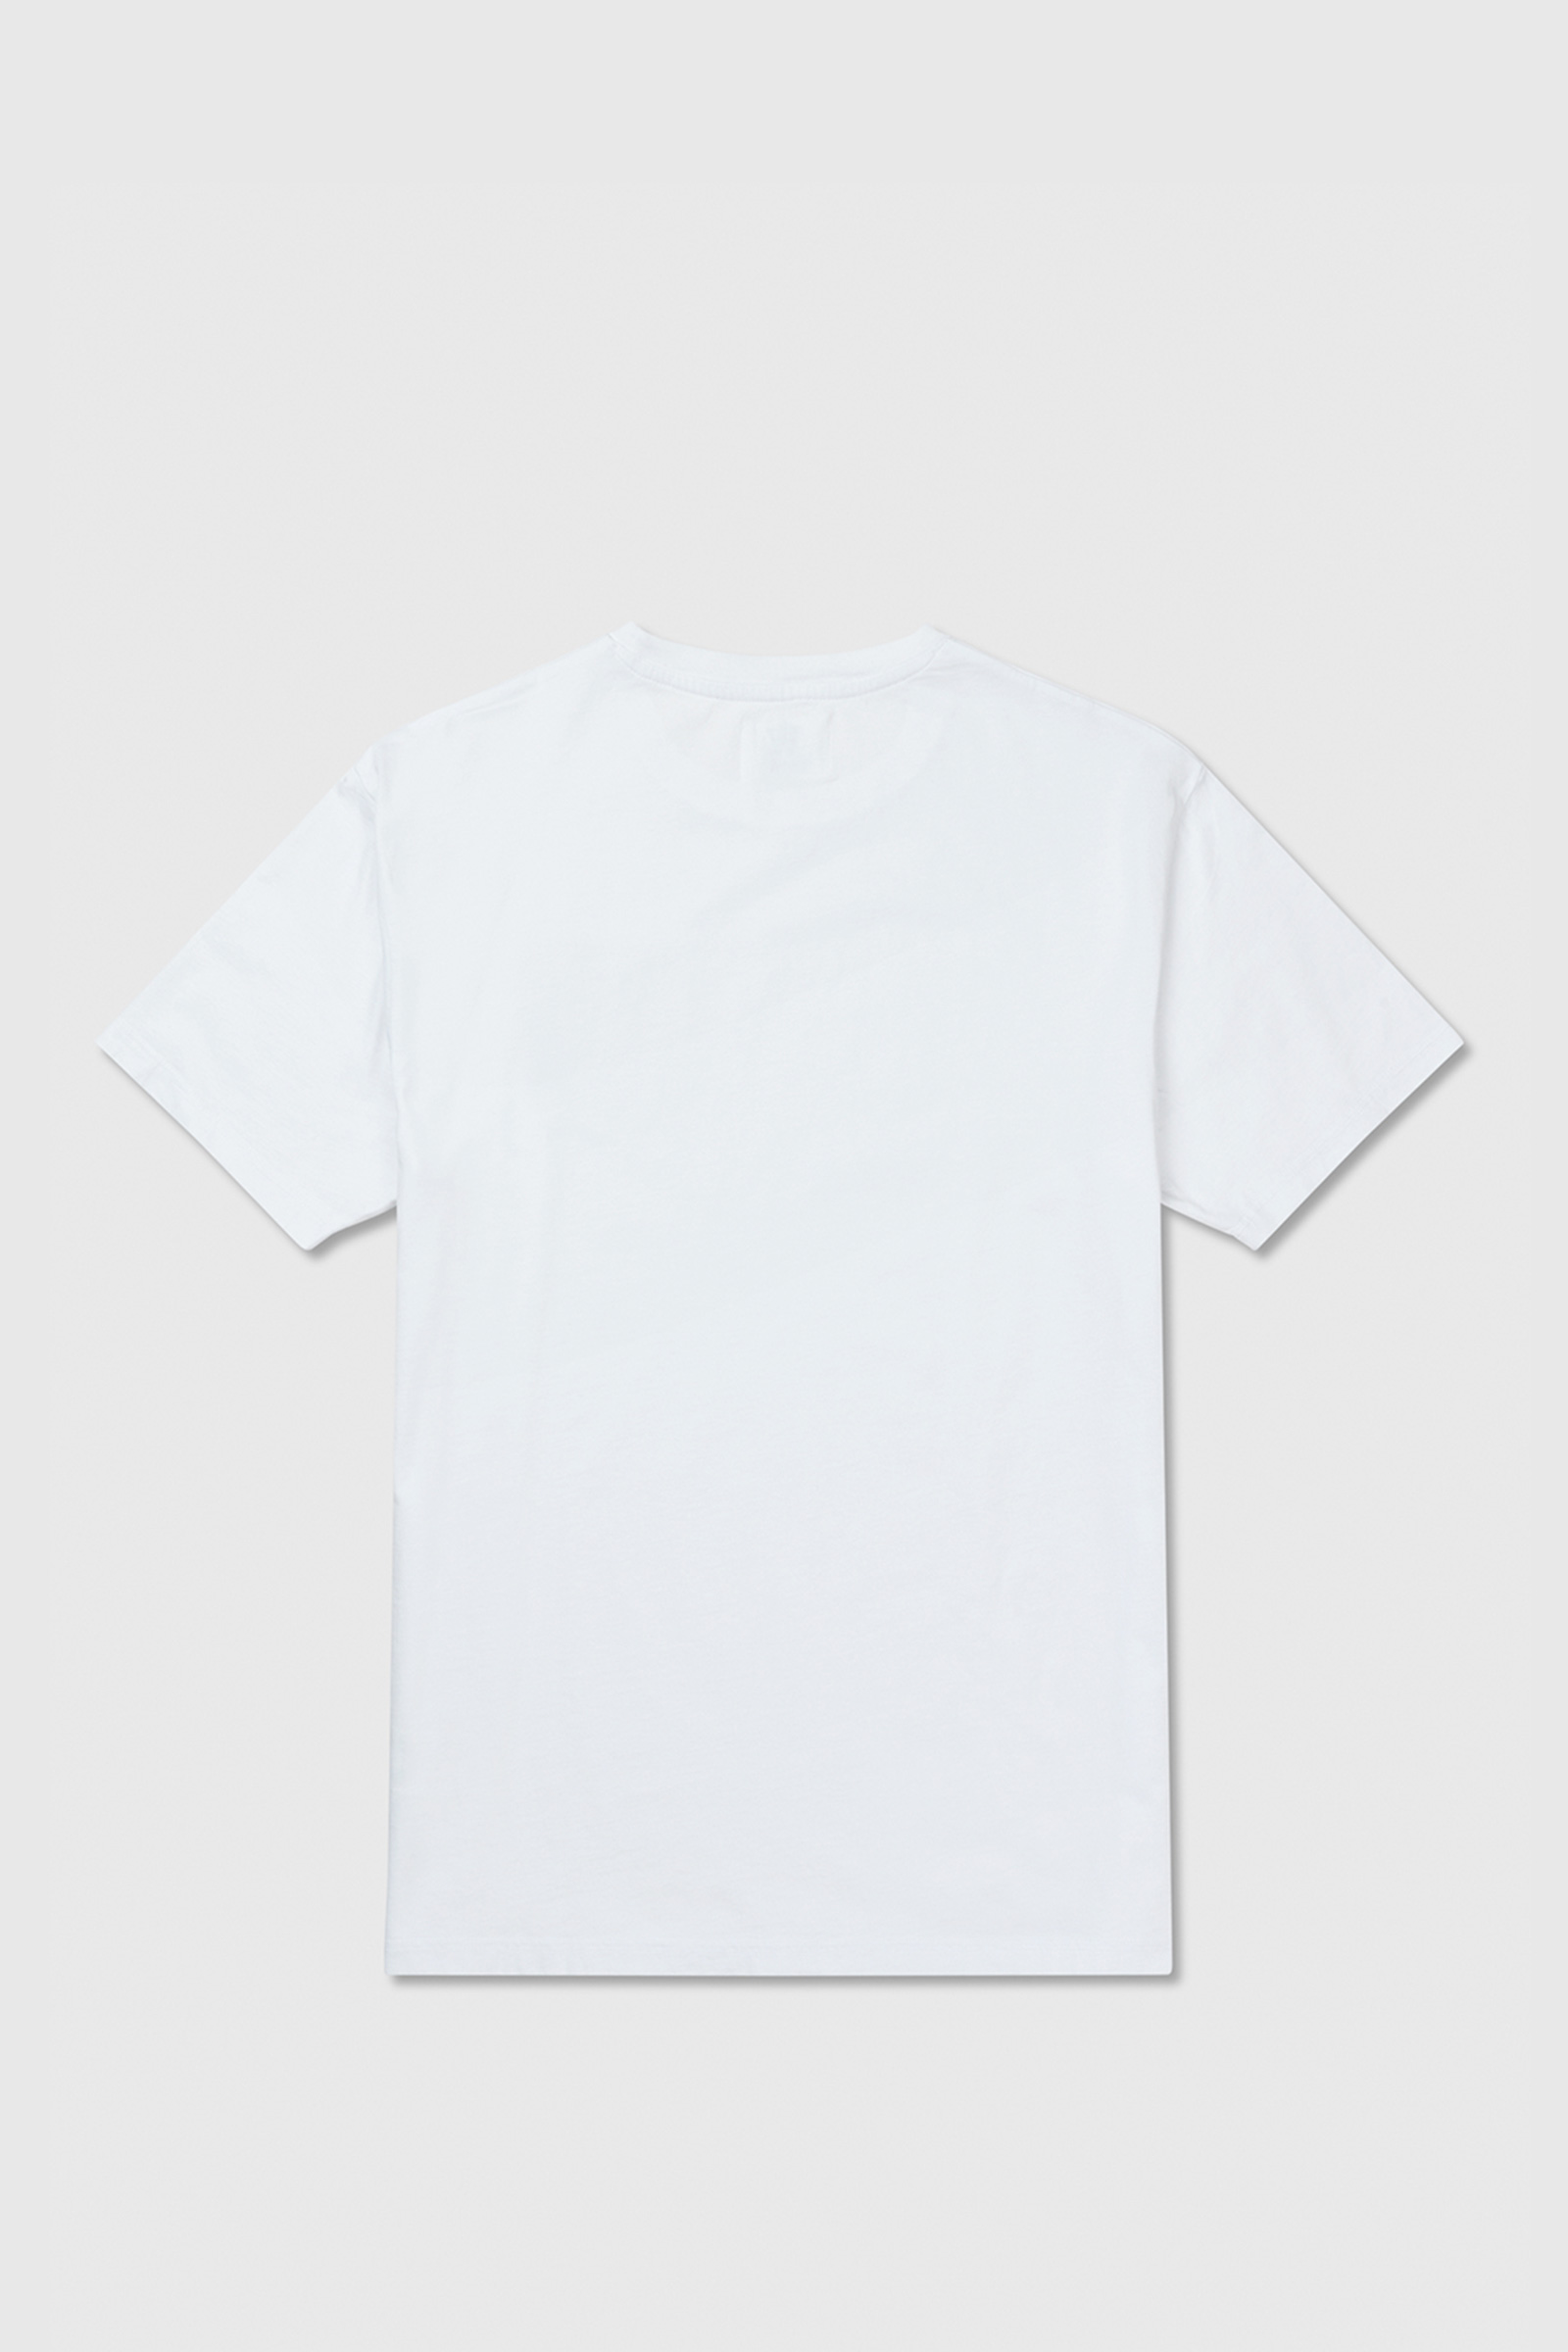 Double A by Wood Wood Ace Badge T-shirt White | WoodWood.com